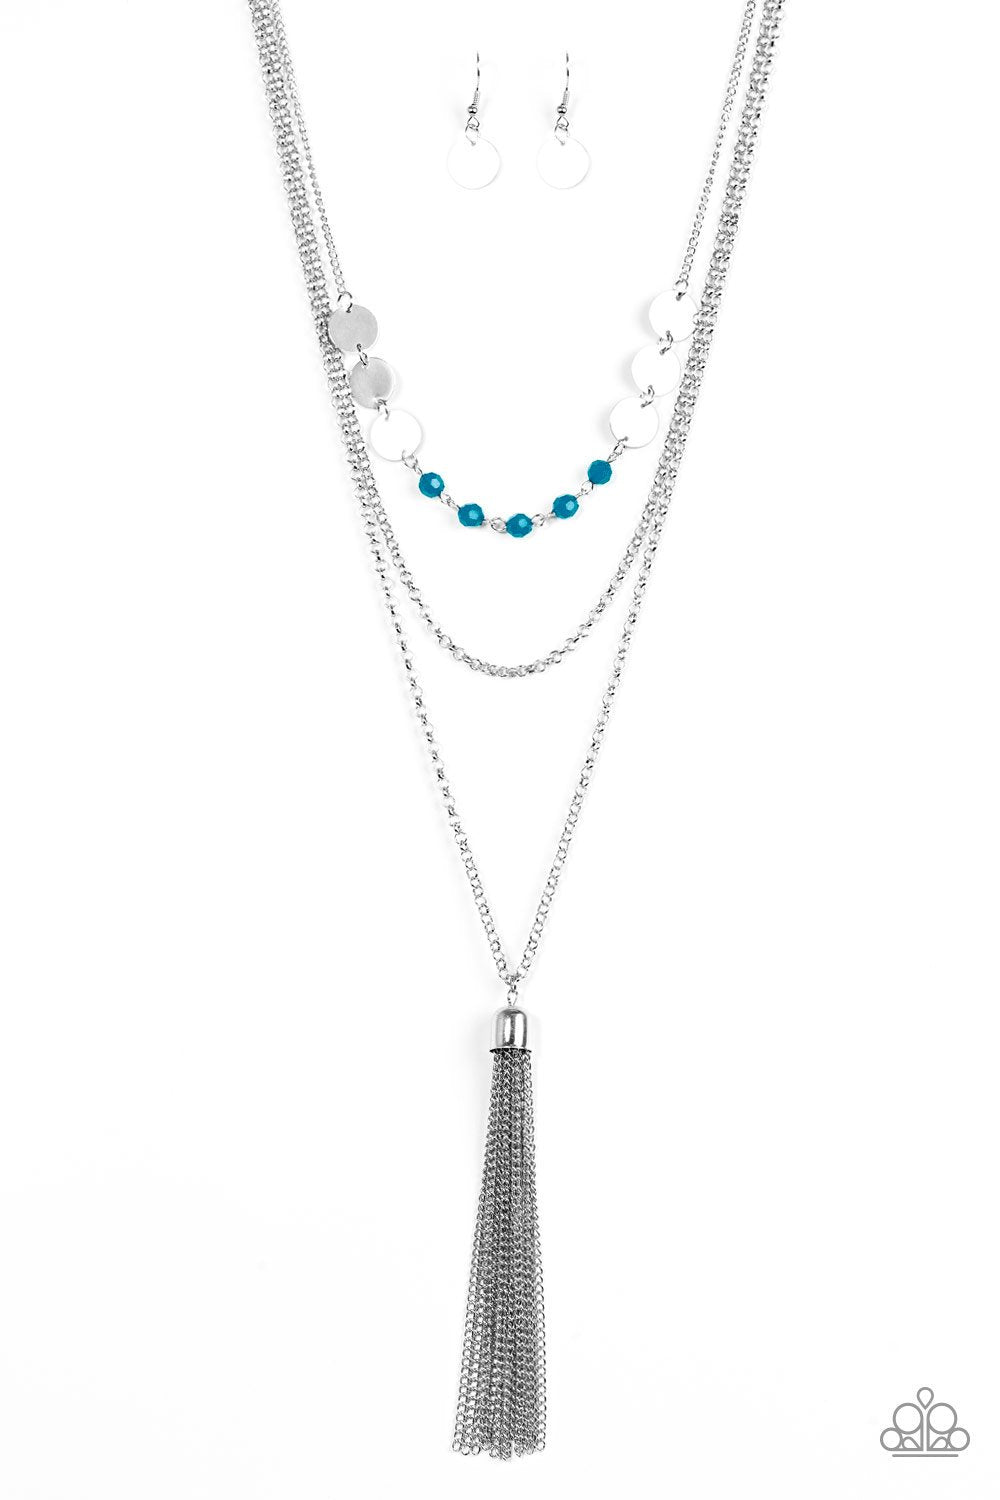 Celebration of Chic Blue and Silver Tassel Necklace - Paparazzi Accessories-CarasShop.com - $5 Jewelry by Cara Jewels